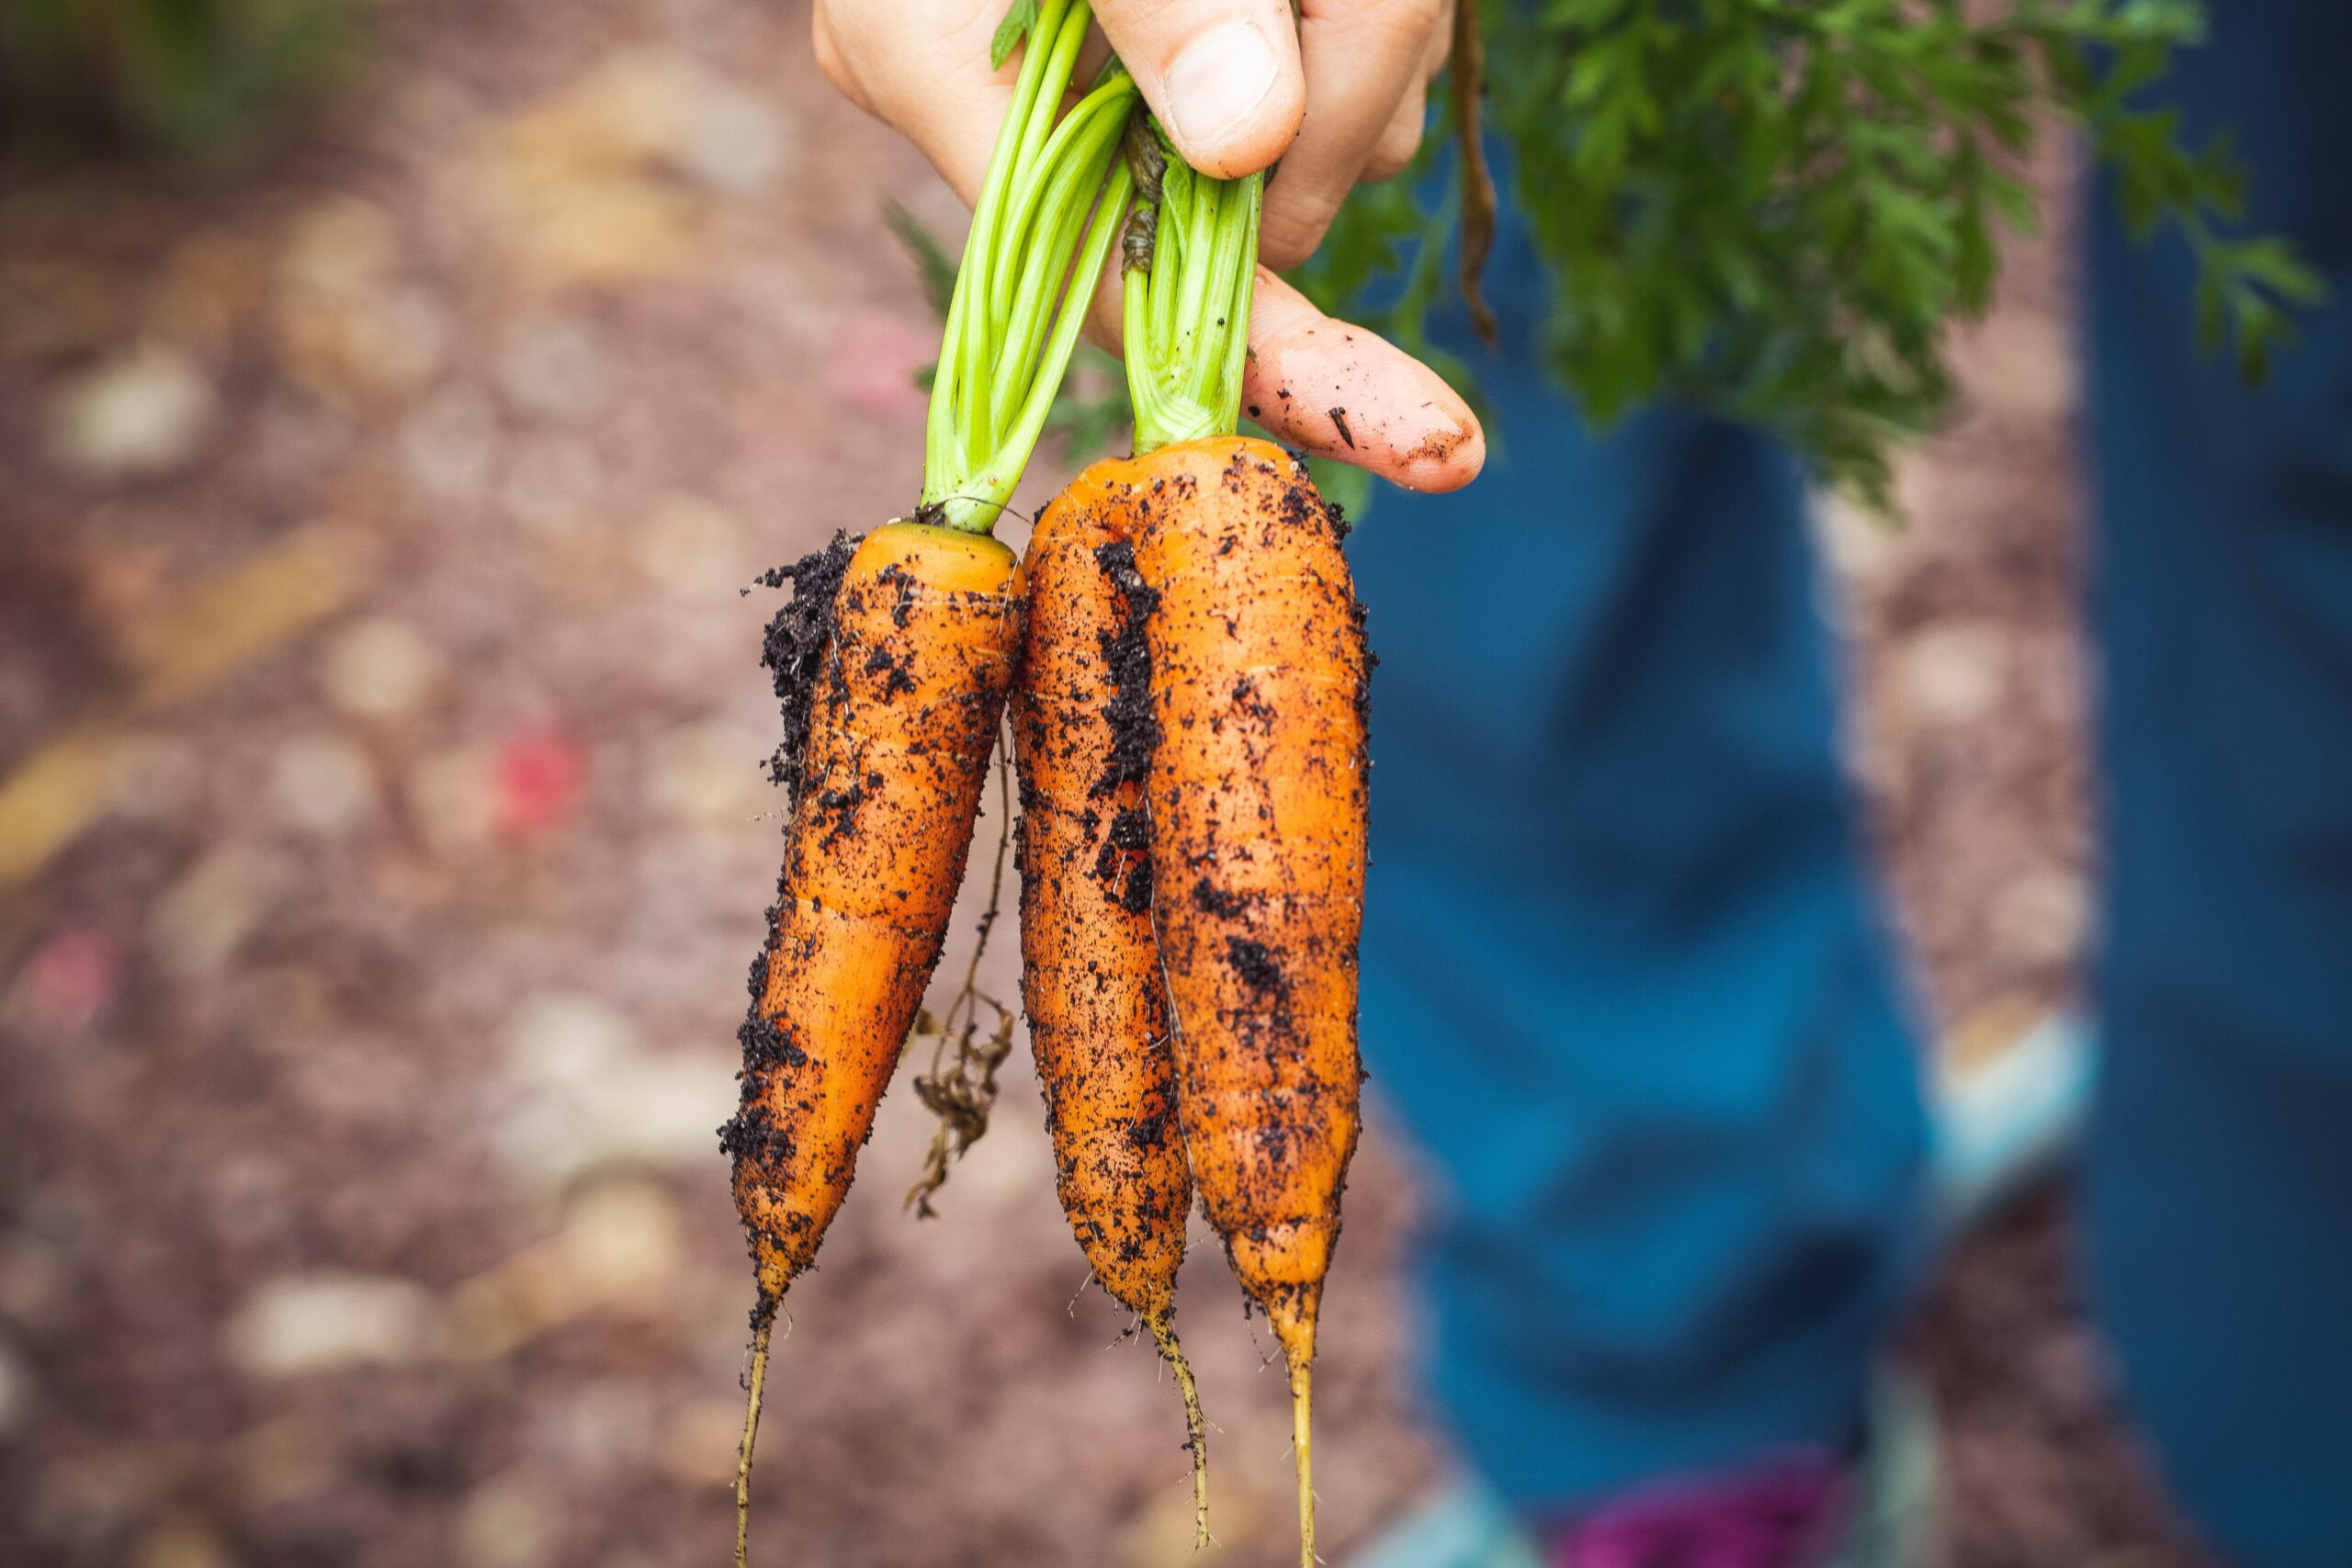 Carrots are well suited to growing in the East End's sandy soils. MARKUS SPISKE